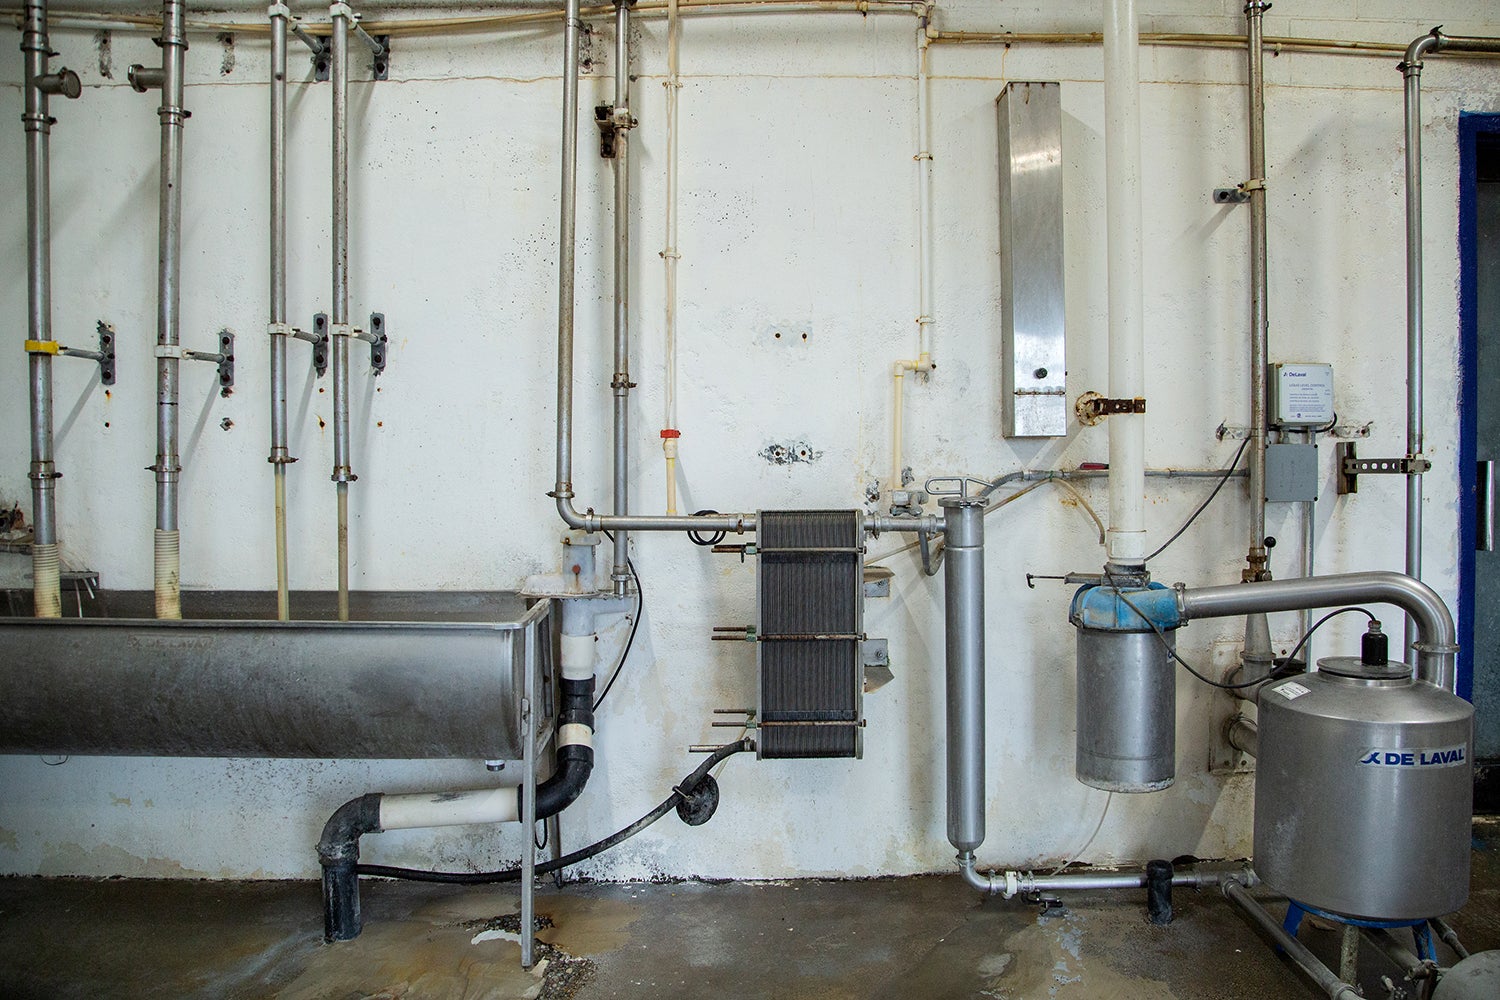 Cooling equipment in a dairy